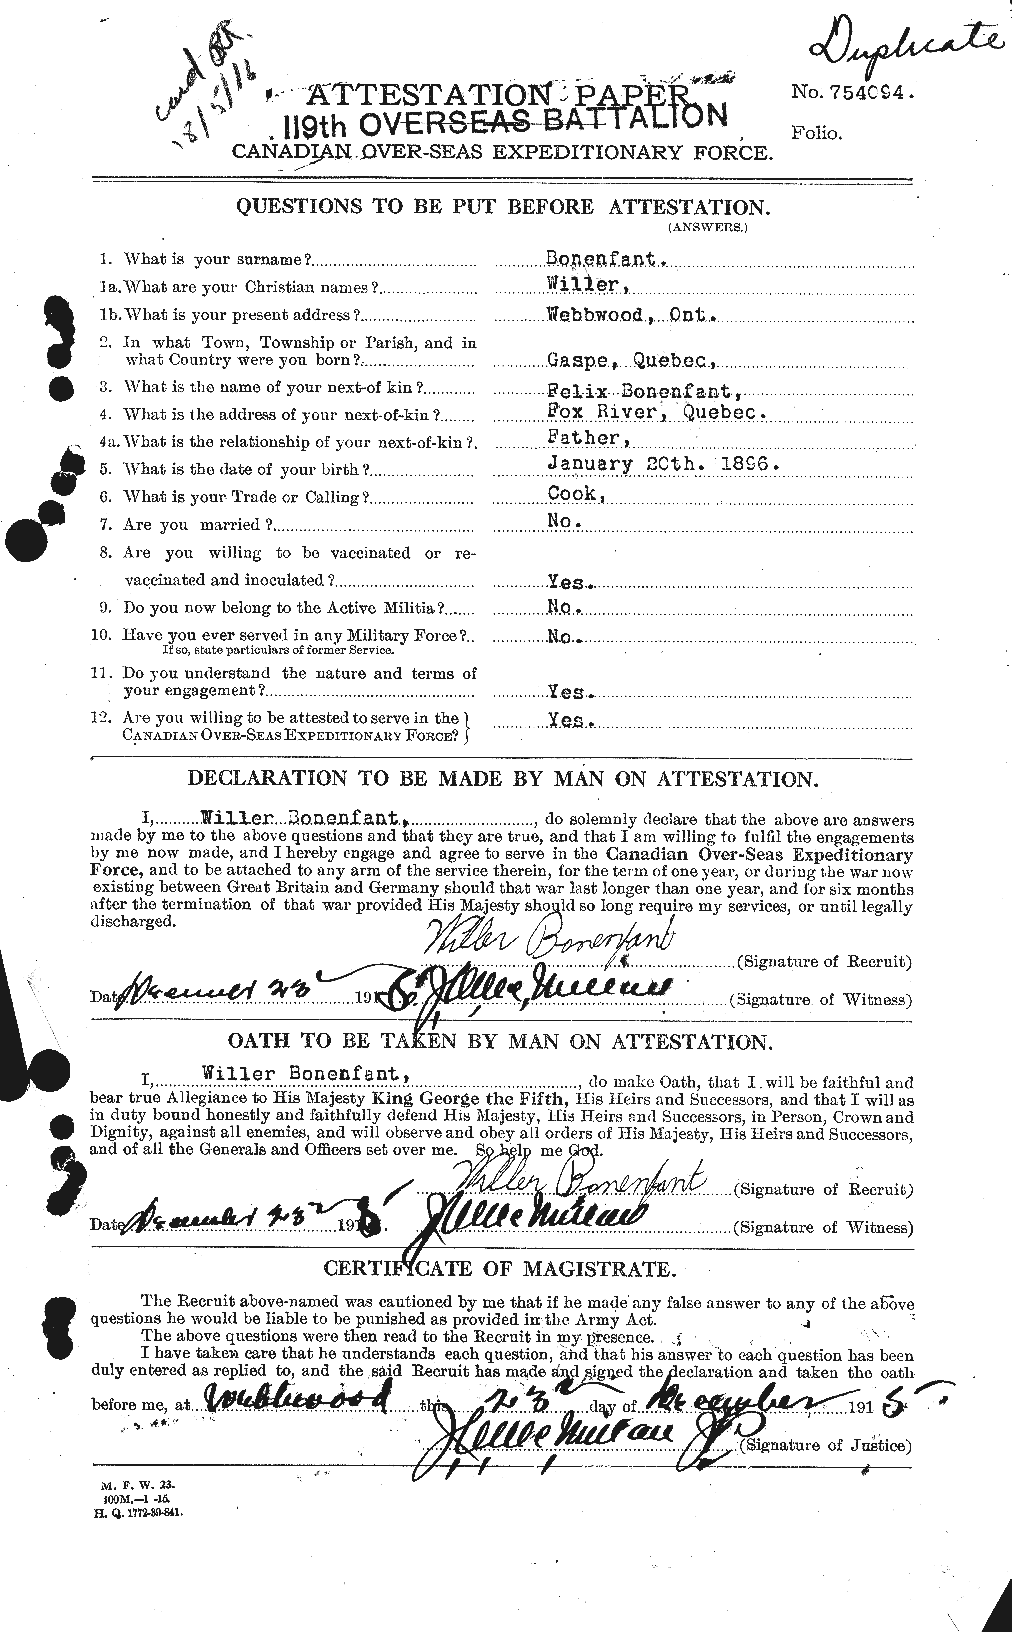 Personnel Records of the First World War - CEF 250574a